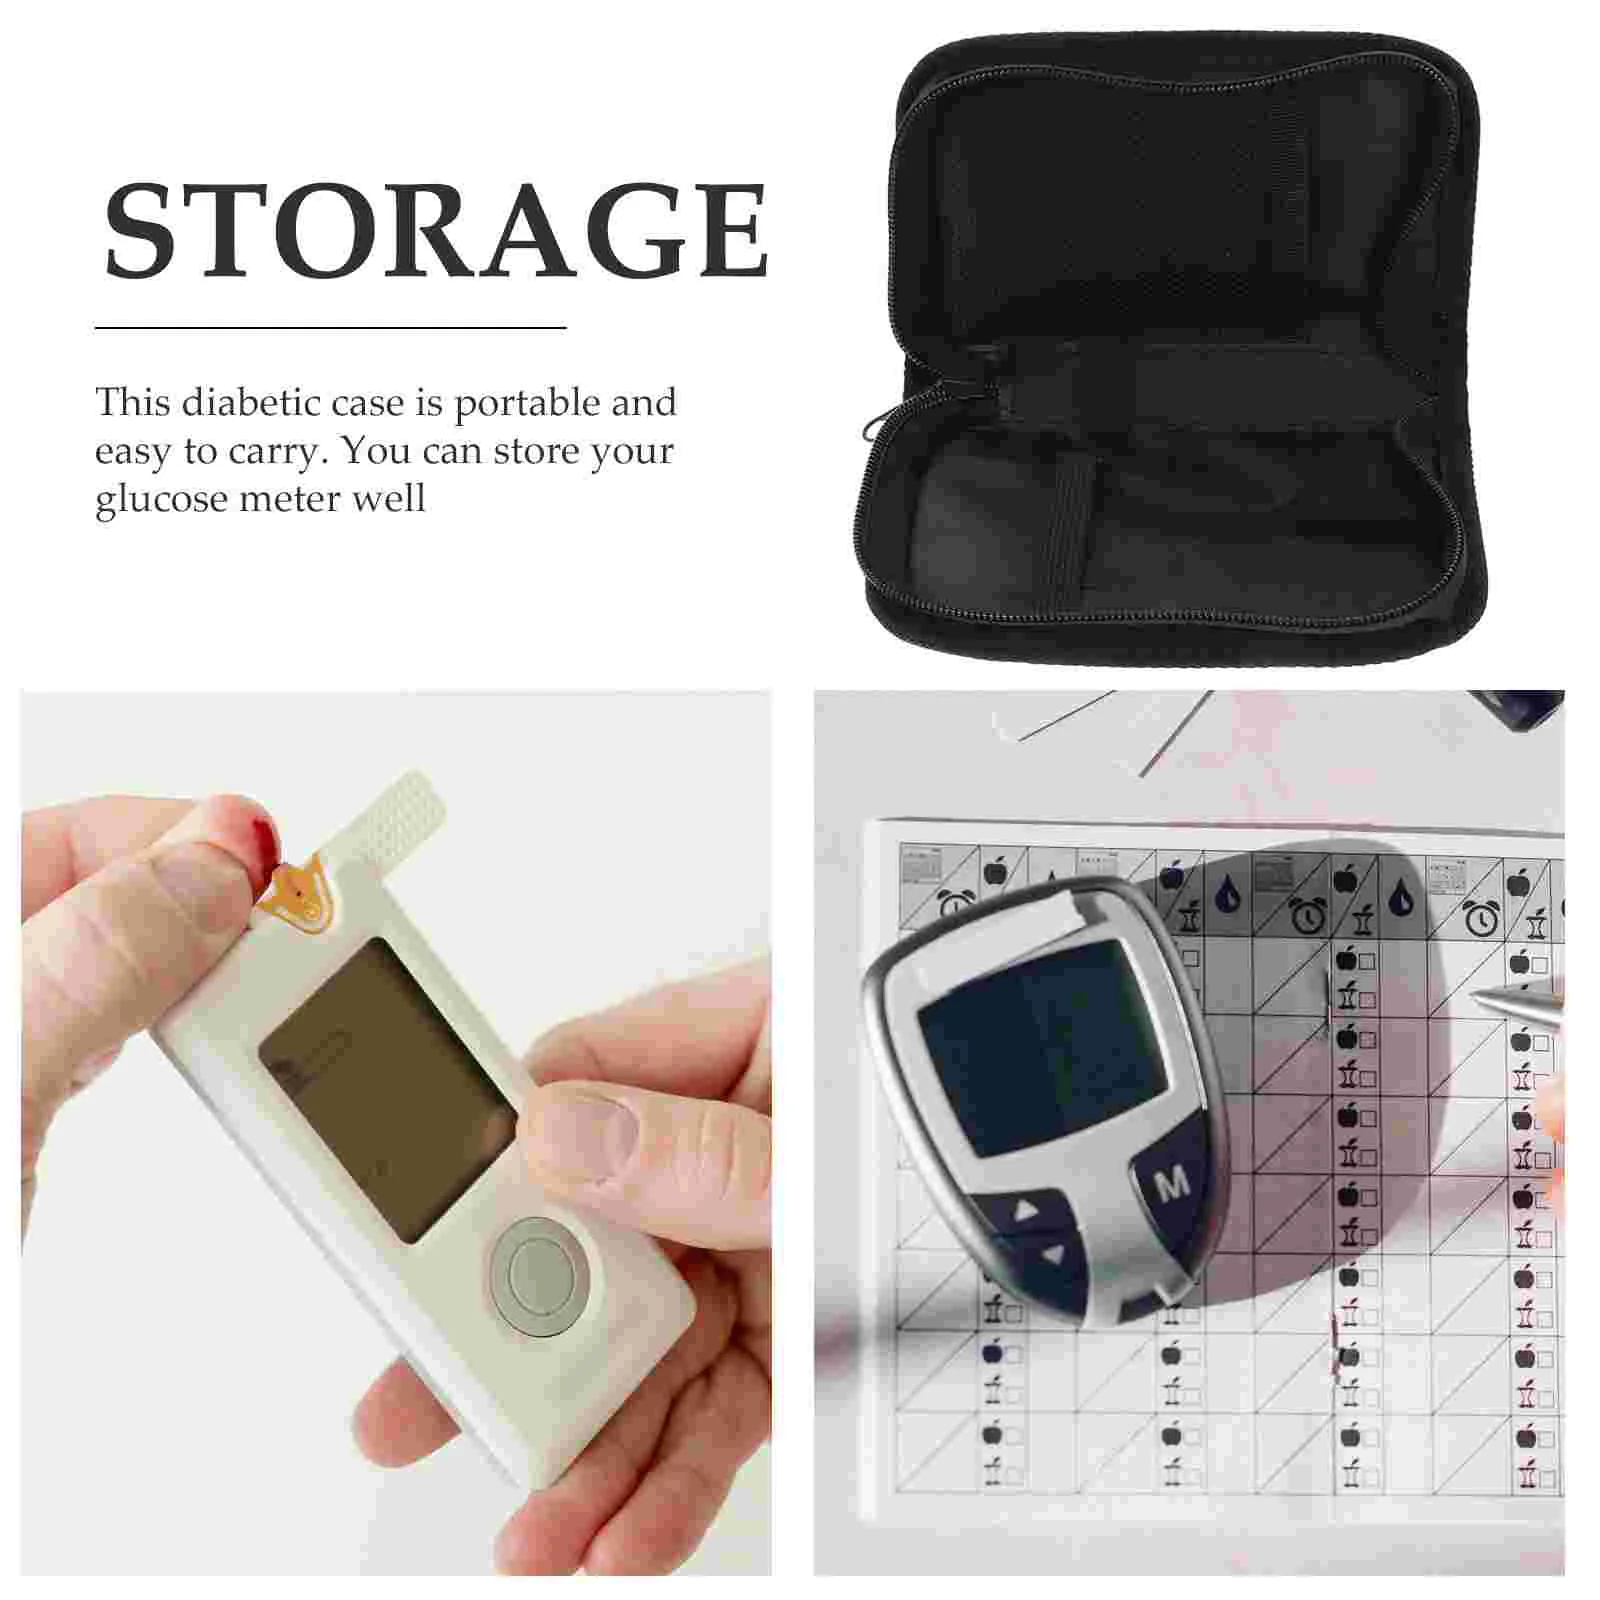 Blood Glucose Meter Storage Bag Case Cover Diabetes Portable Carrier Organizing Monitor Pouch Organizer The Tote